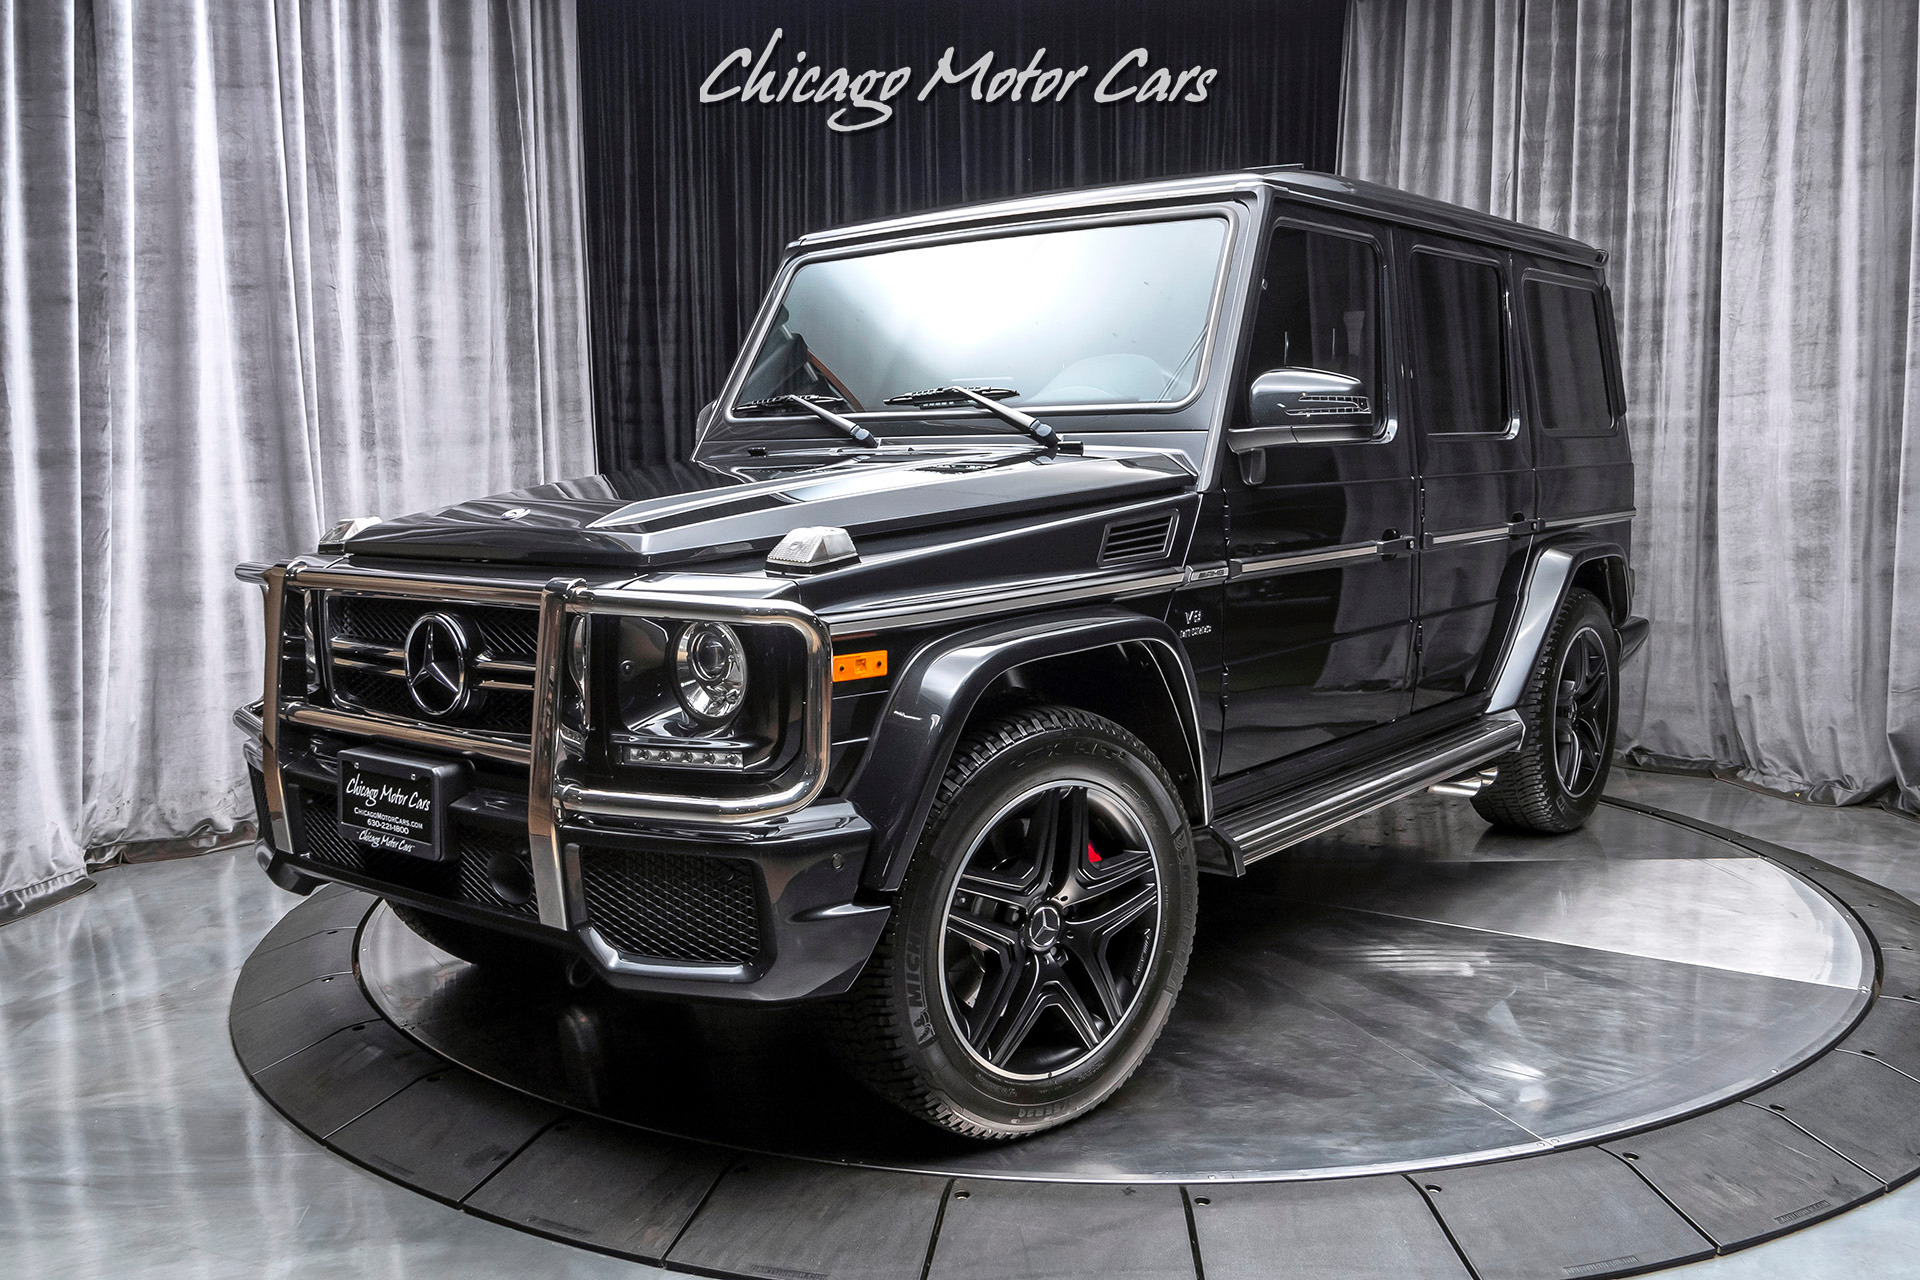 Used-2017-Mercedes-Benz-G63-4-Matic-AMG-148kMSRP-Designo-Exclusive-Leather-Package